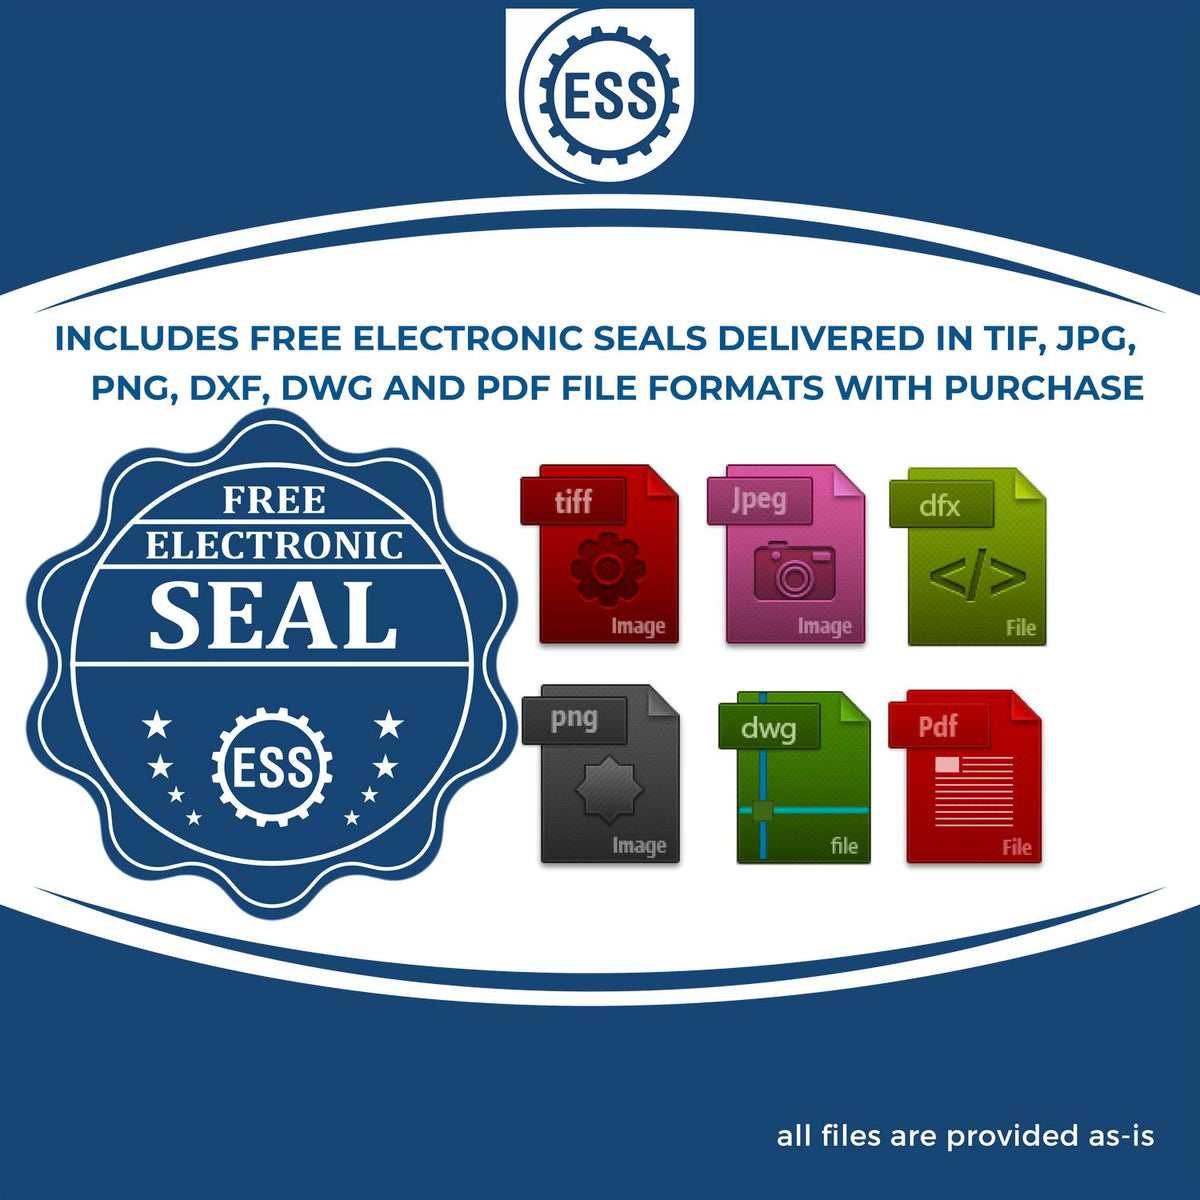 An infographic for the free electronic seal for the Slim Pre-Inked Ohio Land Surveyor Seal Stamp illustrating the different file type icons such as DXF, DWG, TIF, JPG and PNG.